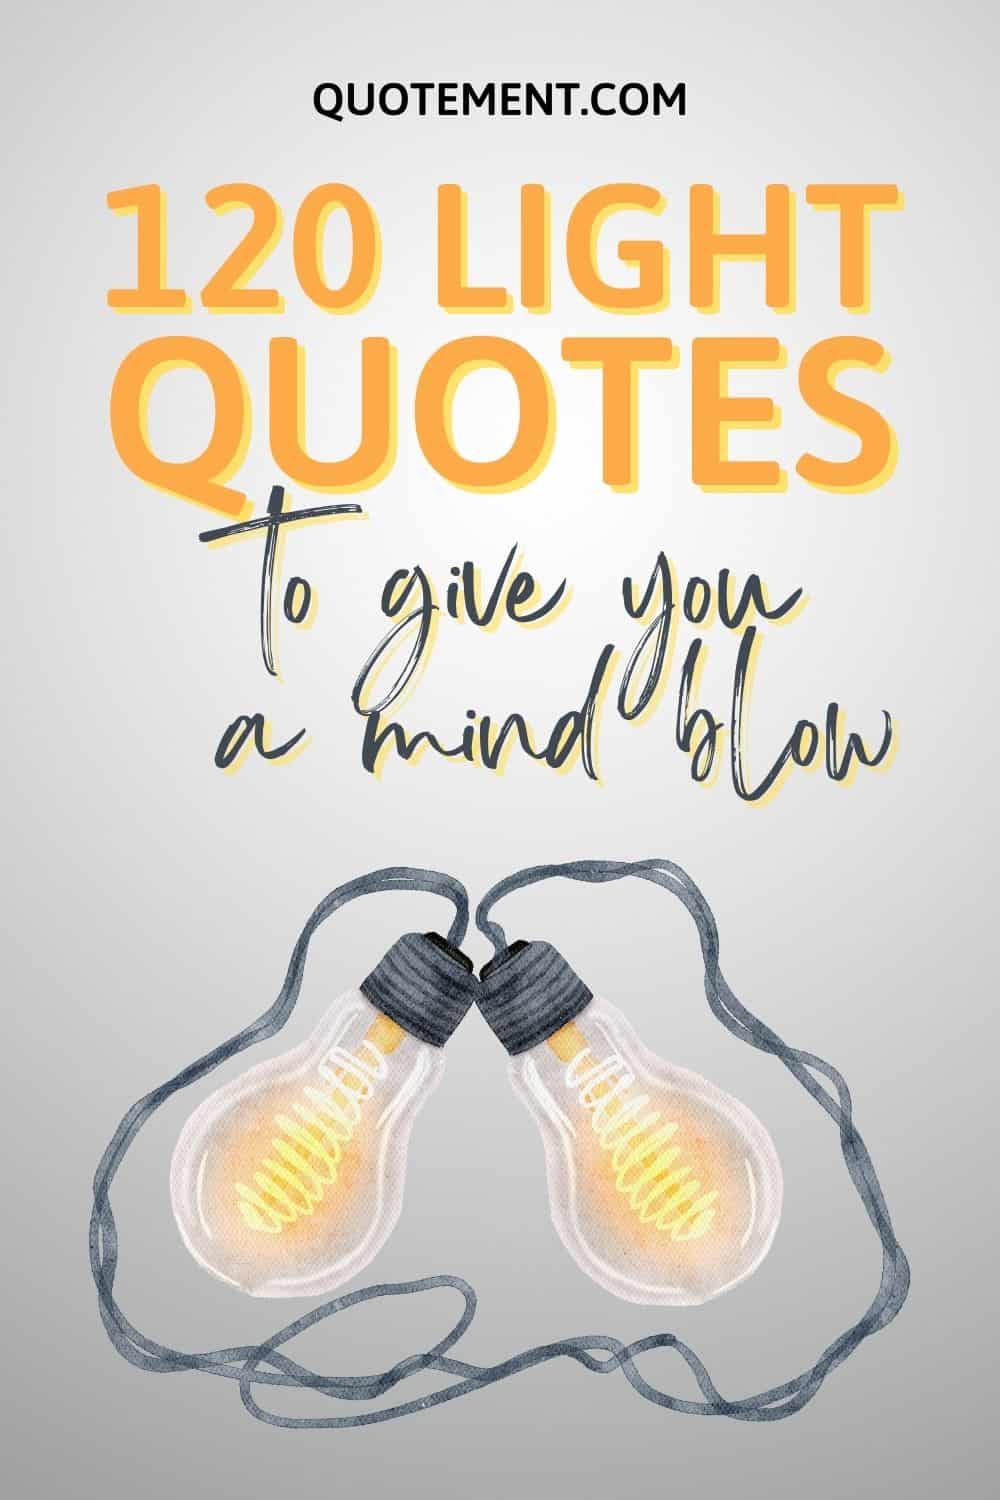 Brilliant List Of 120 Light Quotes To Awaken Your Mind
